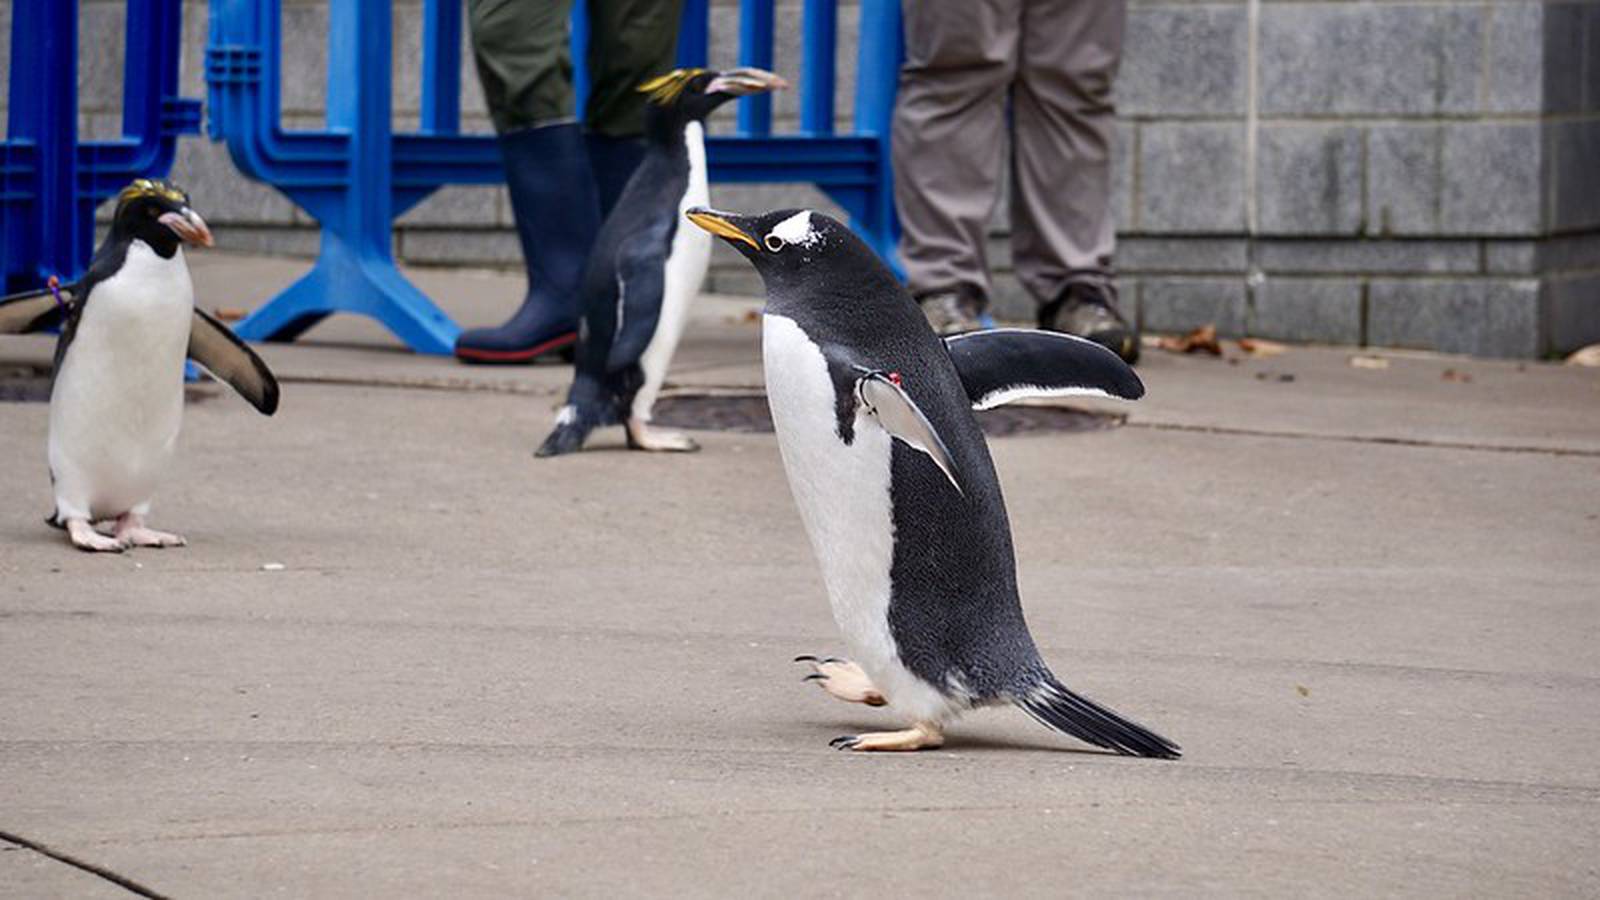 PHOTOS: Annual Penguins on Parade tradition kicks off at Pittsburgh Zoo